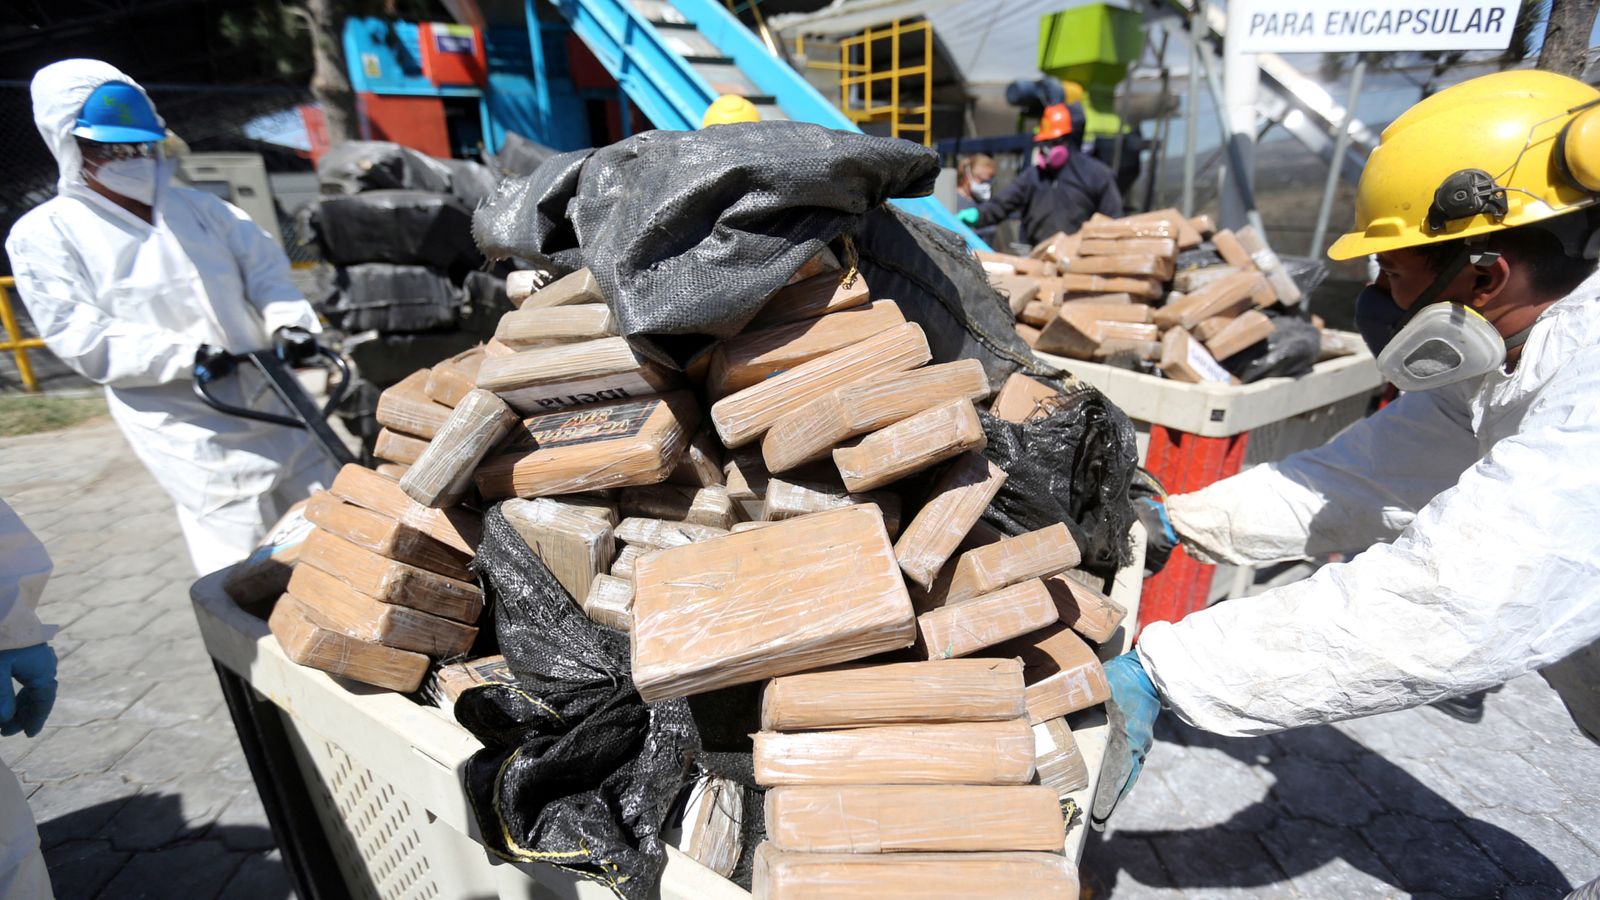 Ecuador: 21.5 tonnes of cocaine destroyed as country battles organised crime